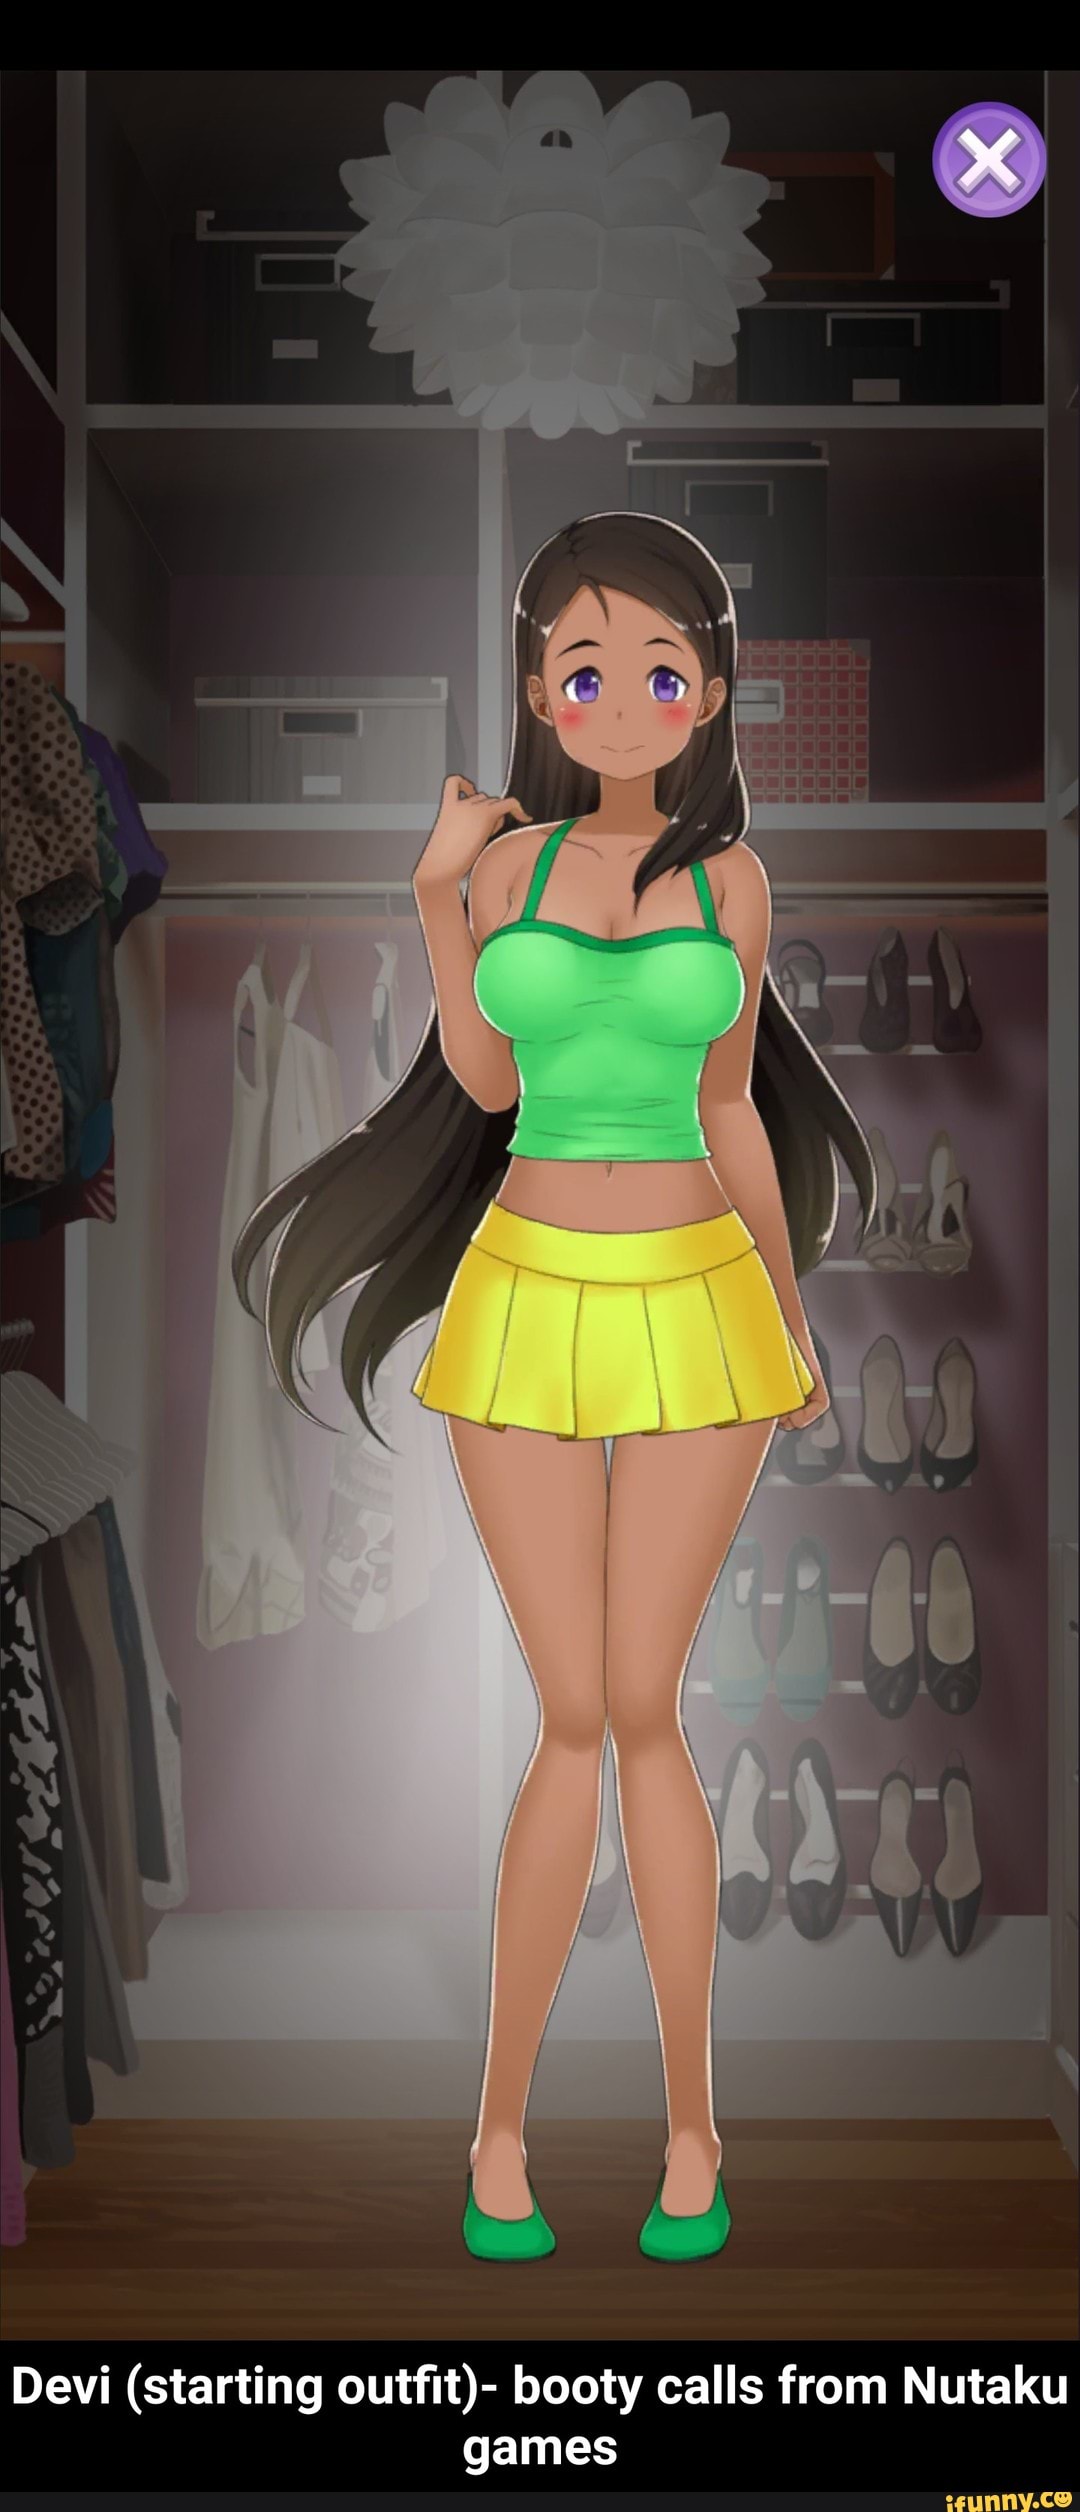 Devi (starting outfit)- booty calls from Nutaku games.